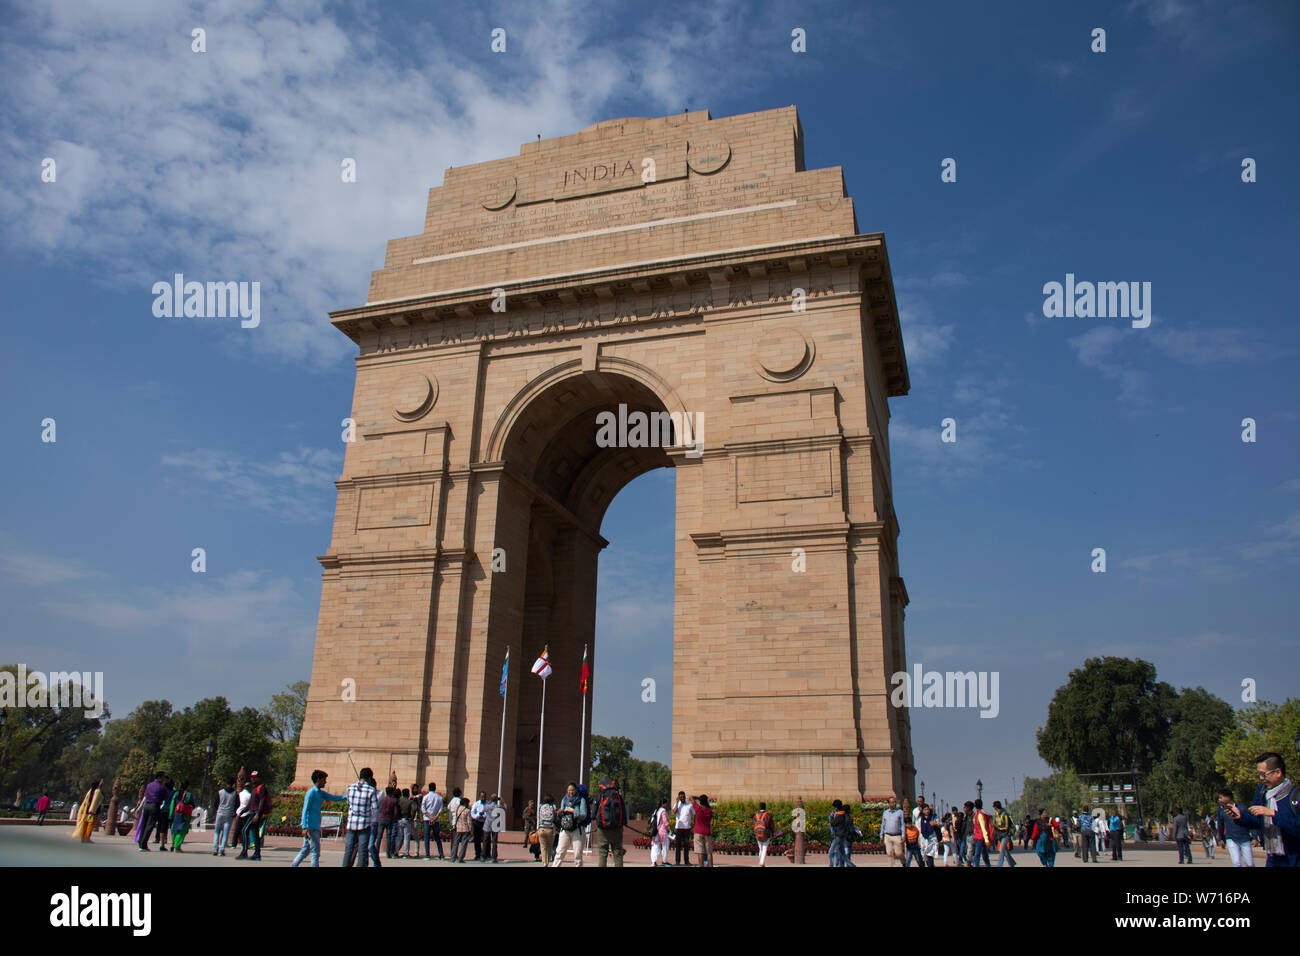 Indian people and foreigner travelers walking travel visit india Gate originally called the All India War Memorial at city of Delhi on March 17, 2019 Stock Photo